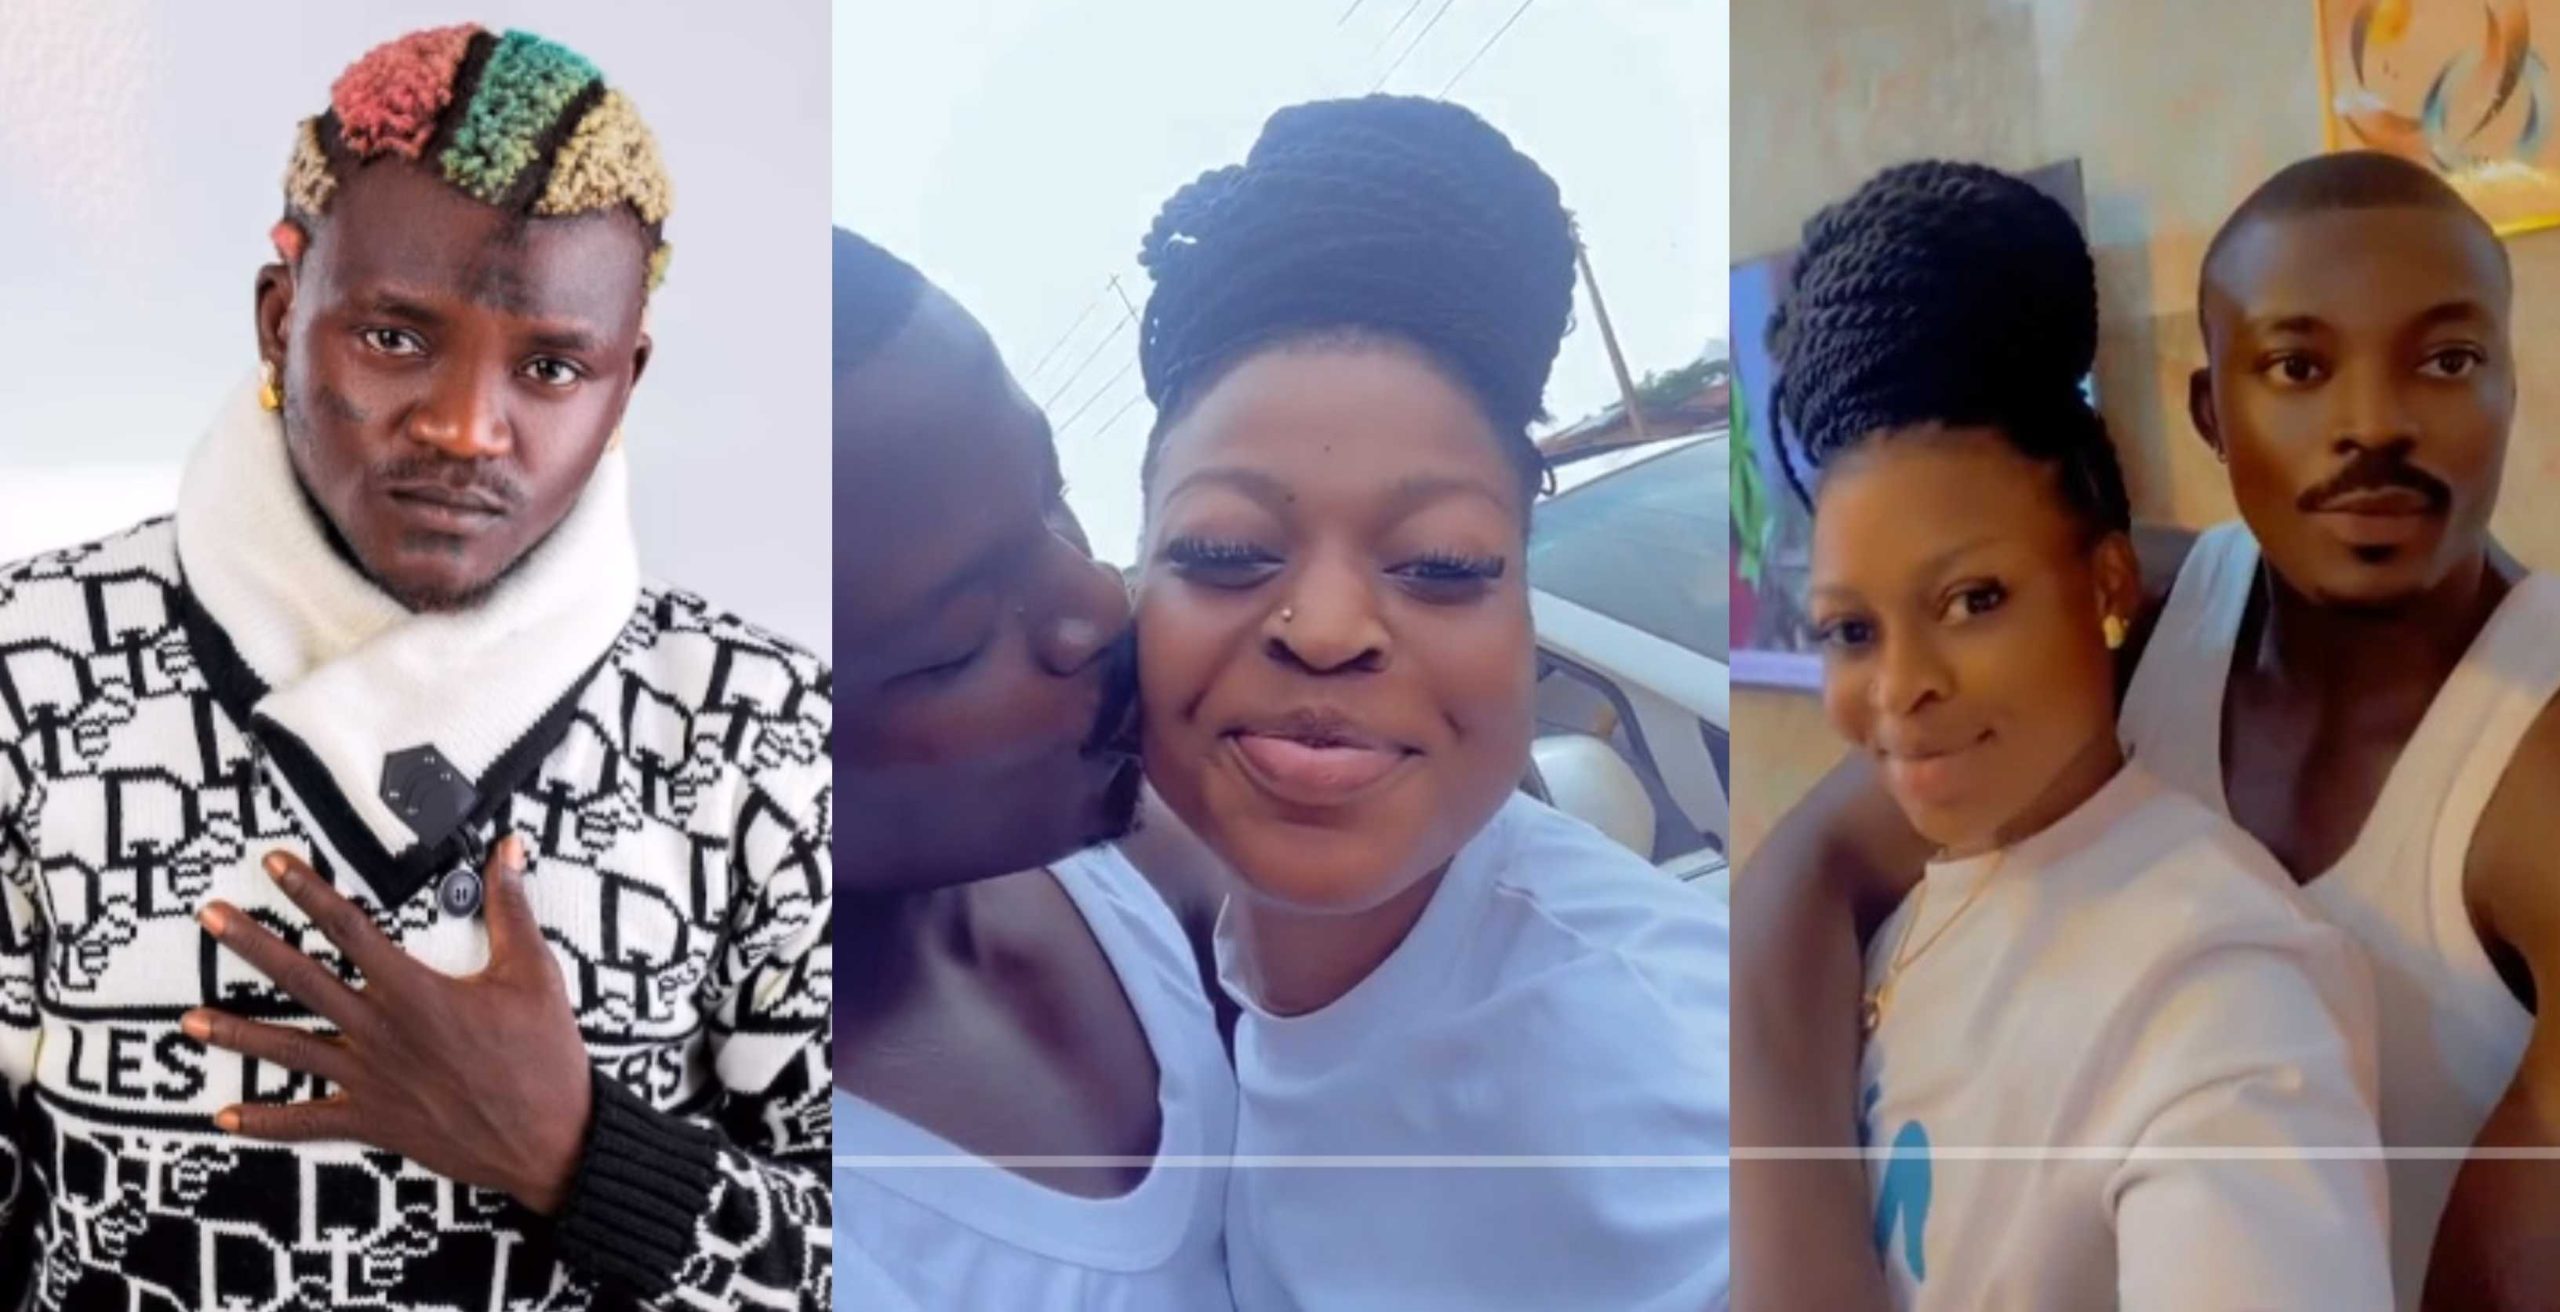 “Wahala! Portable no go let us rest online today” – Reactions trail as Portable 3rd babymama shares romantic video with mystery man [Video]